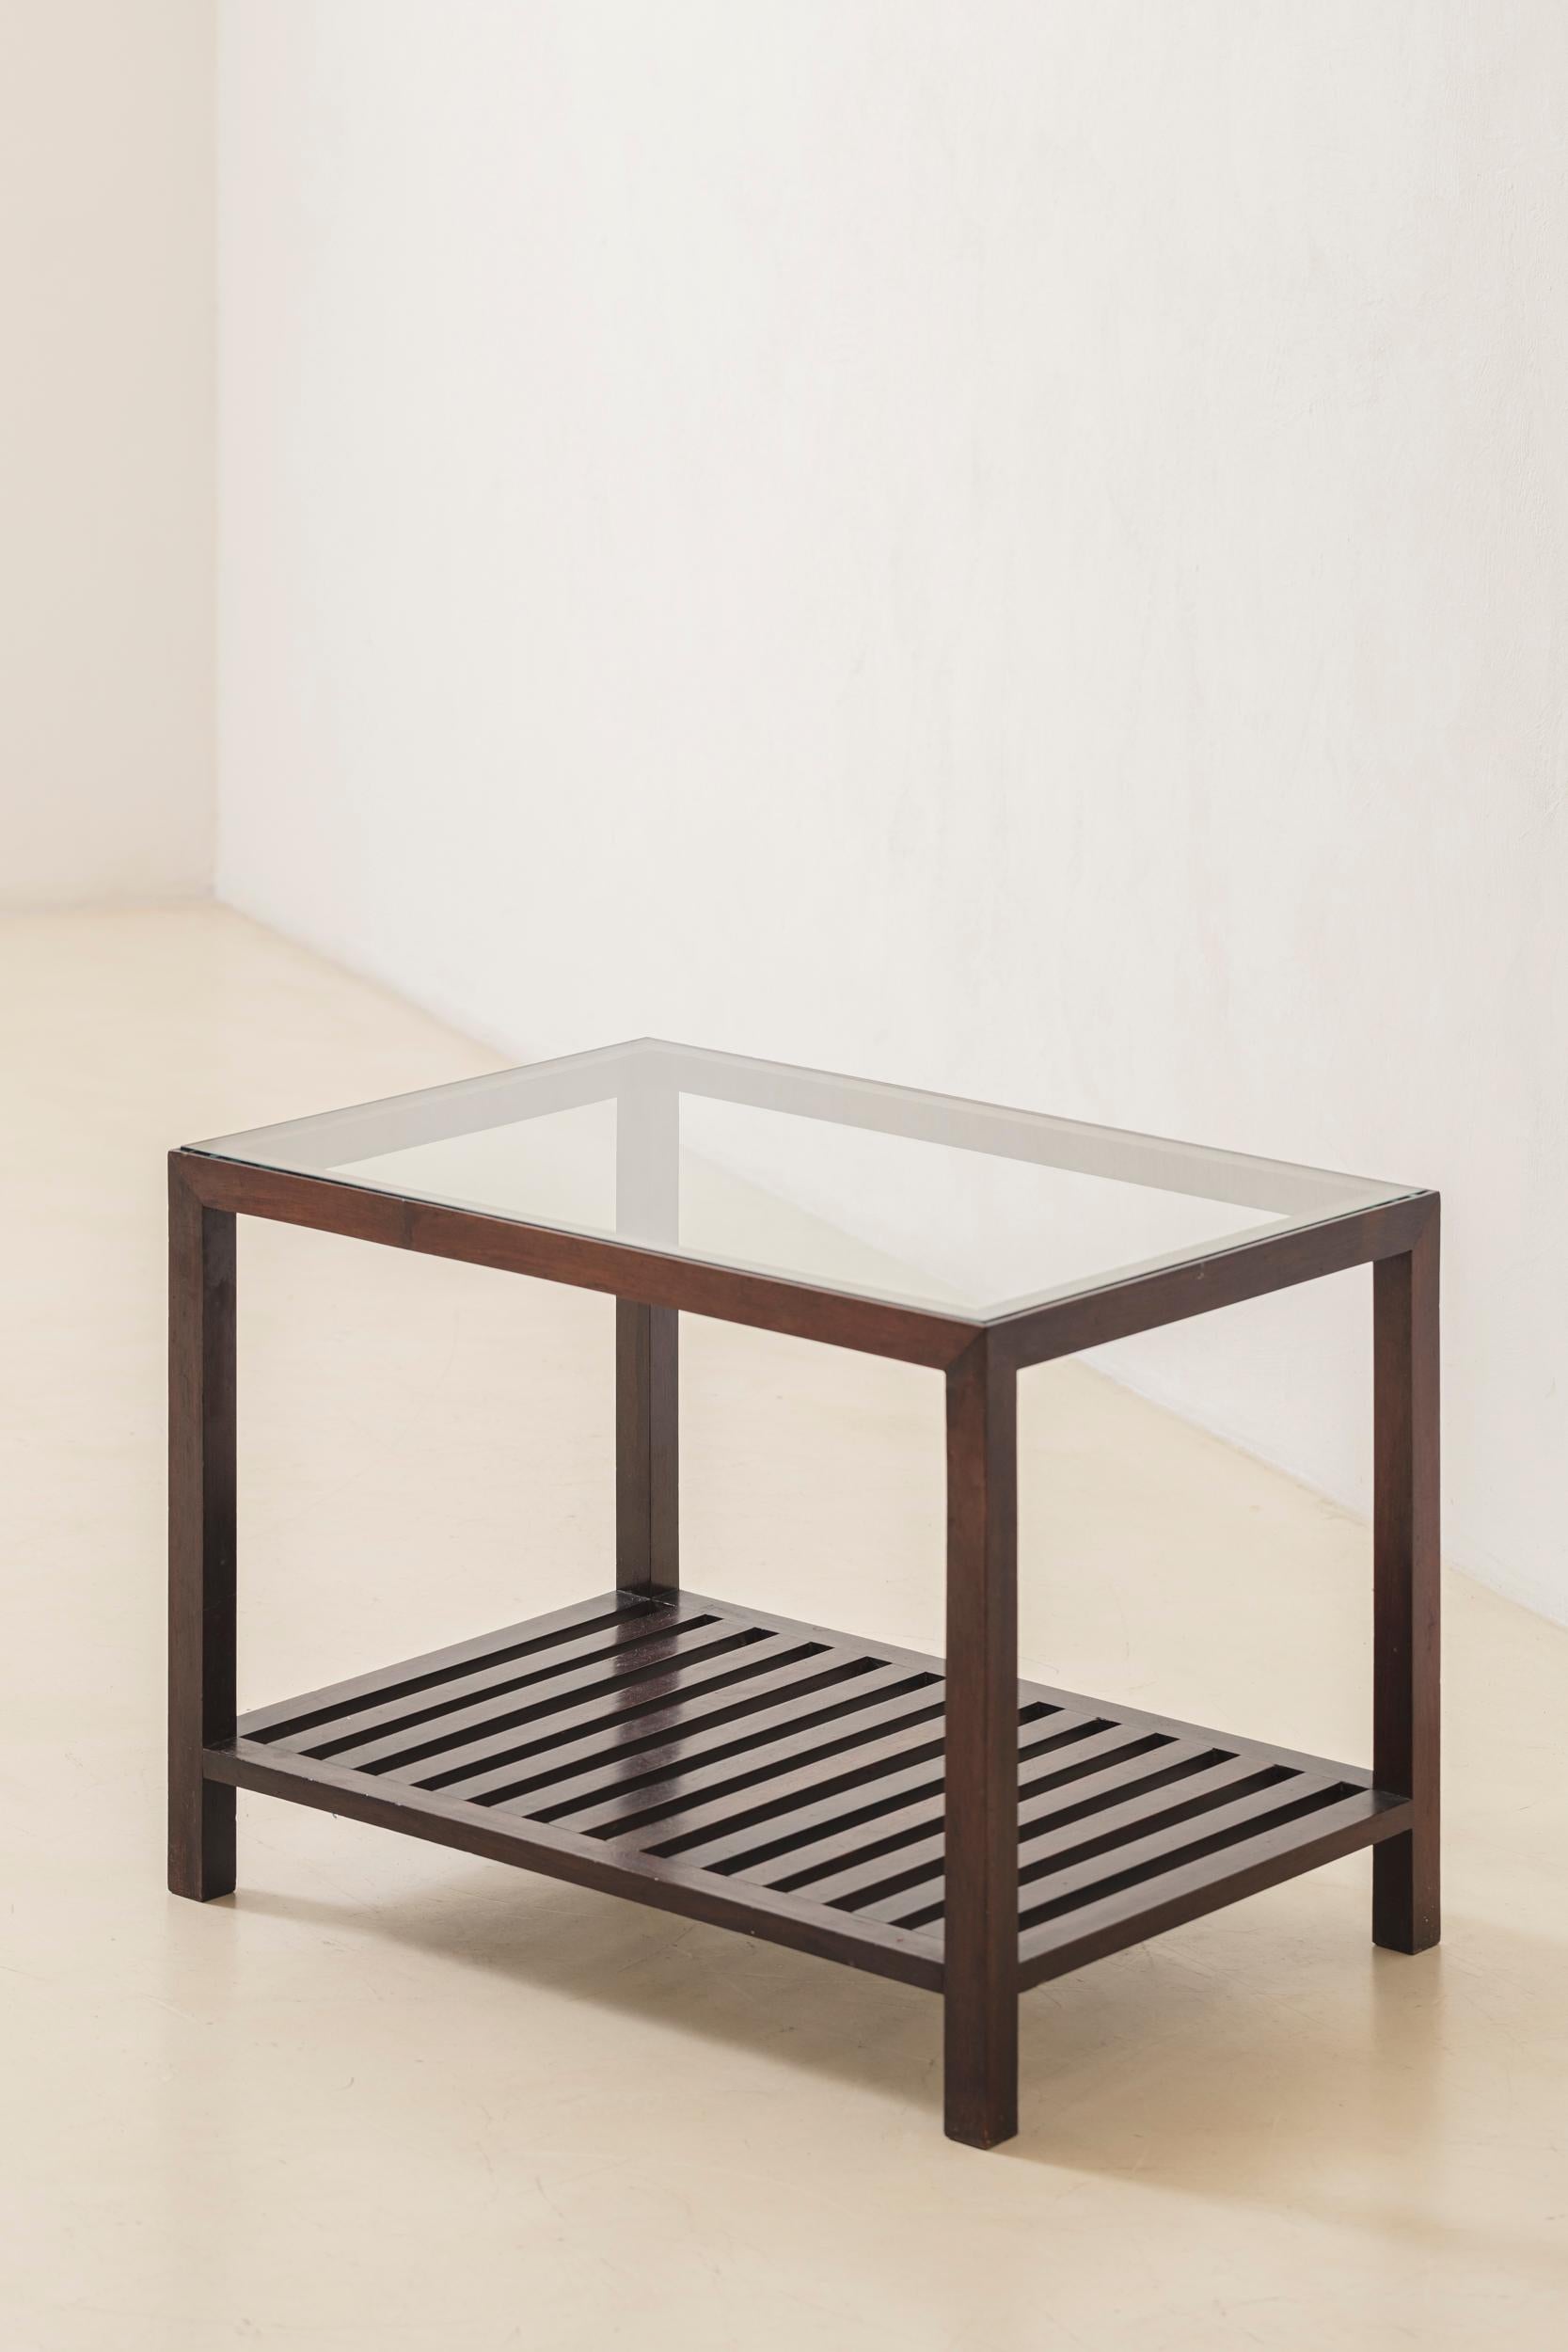 Mid-20th Century Rosewood and Glass Side Table by Unknown Designer, Brazilian Modern, 1960s For Sale